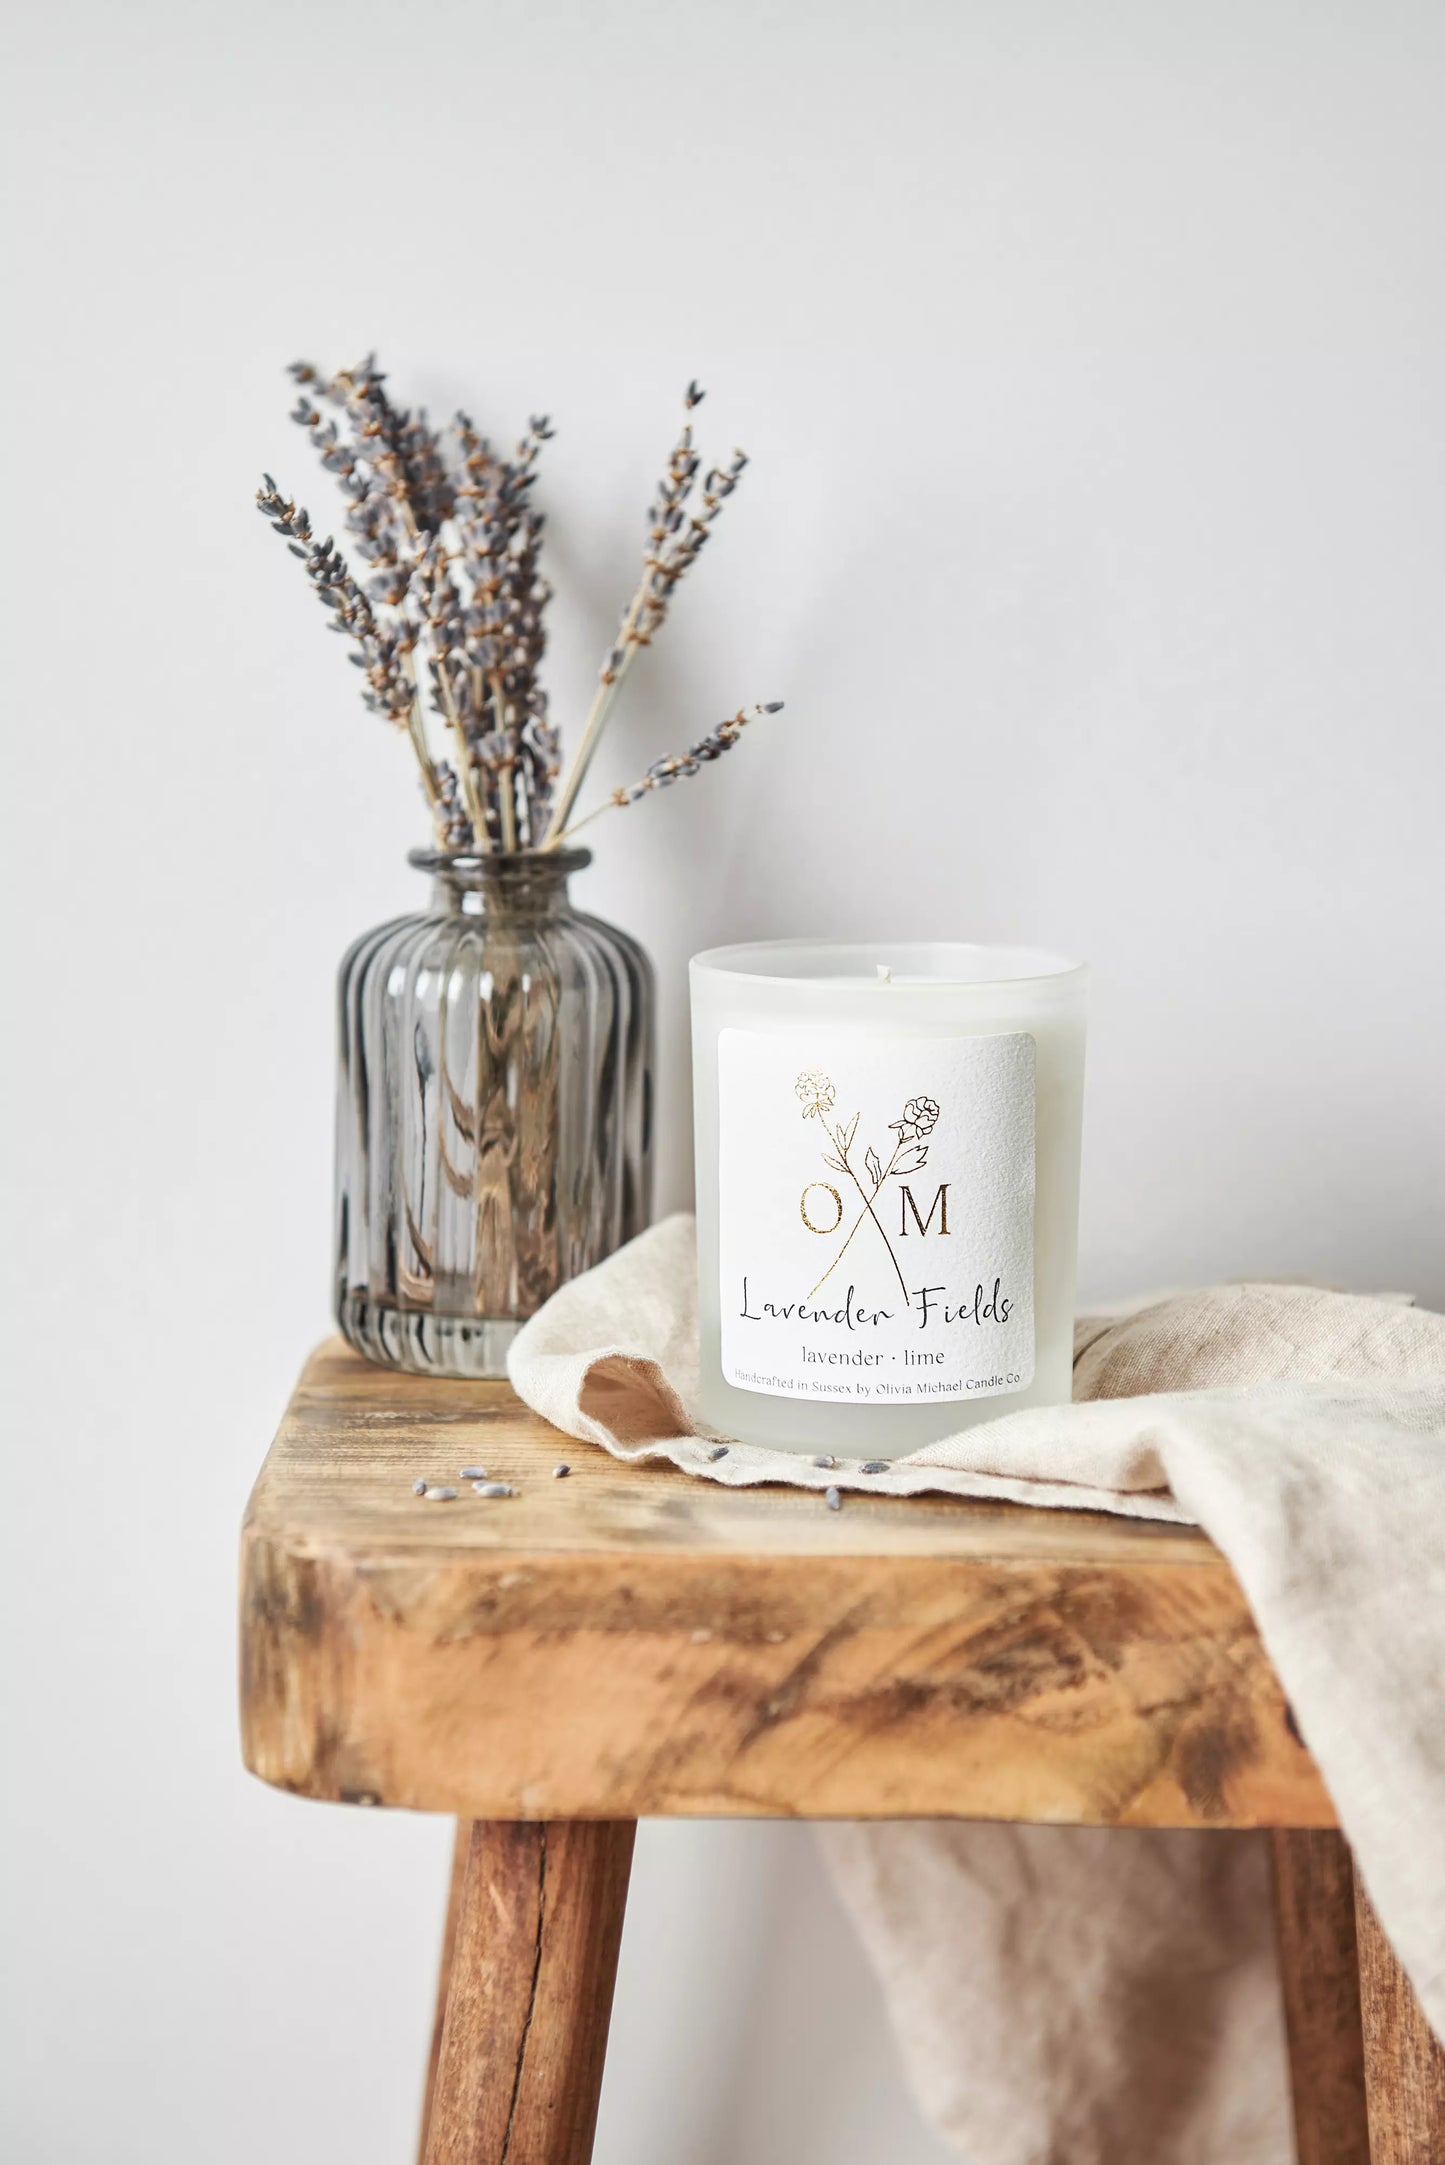 Our lavender aromatherapy candle is on display in a clear frosted glass jar.